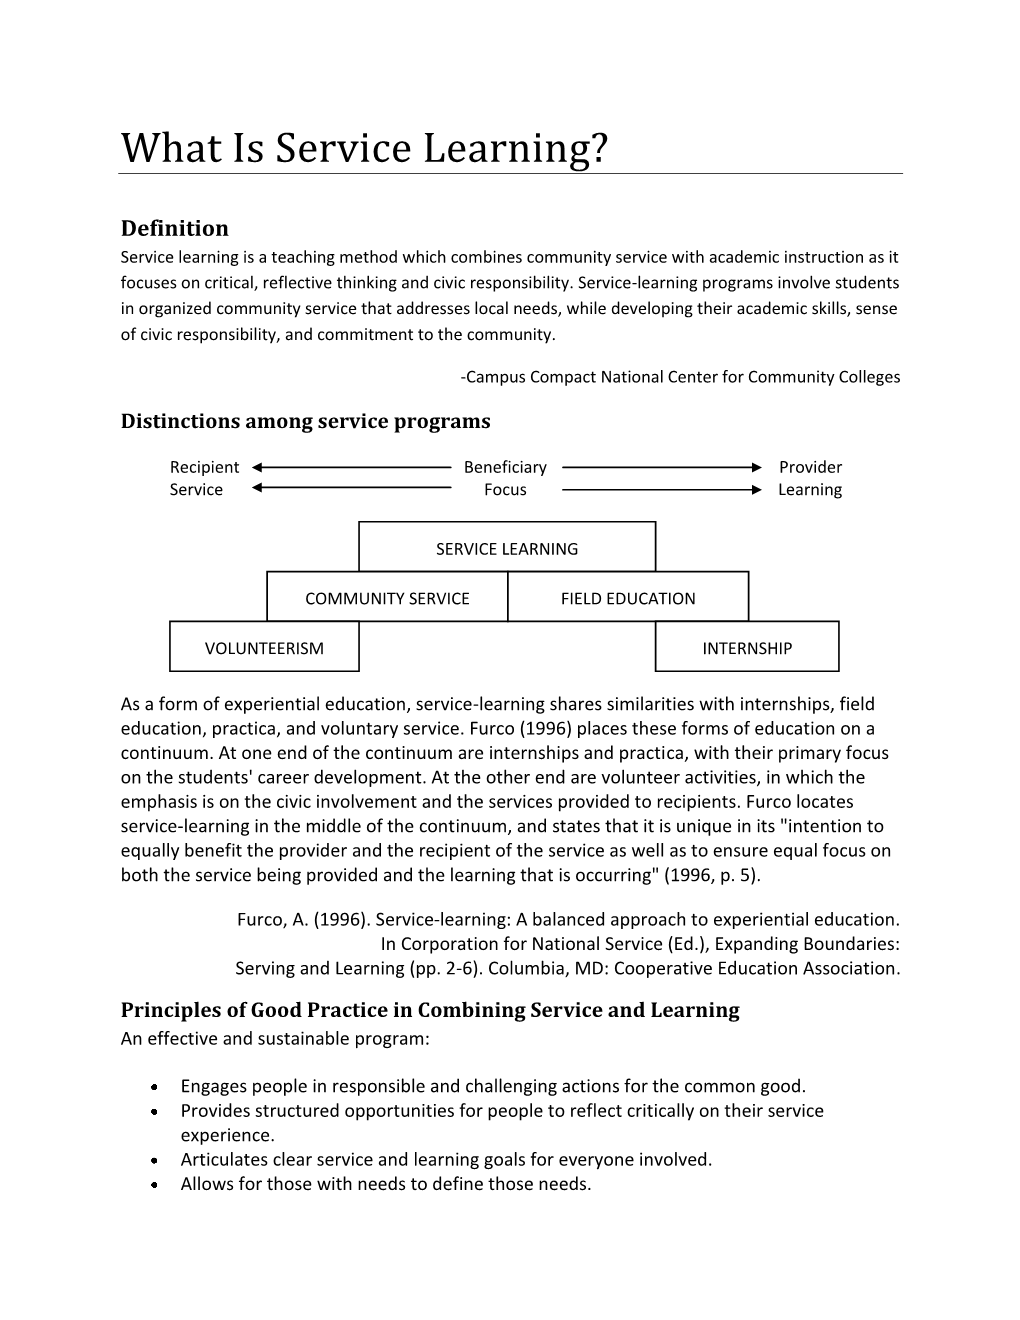 What Is Service Learning?